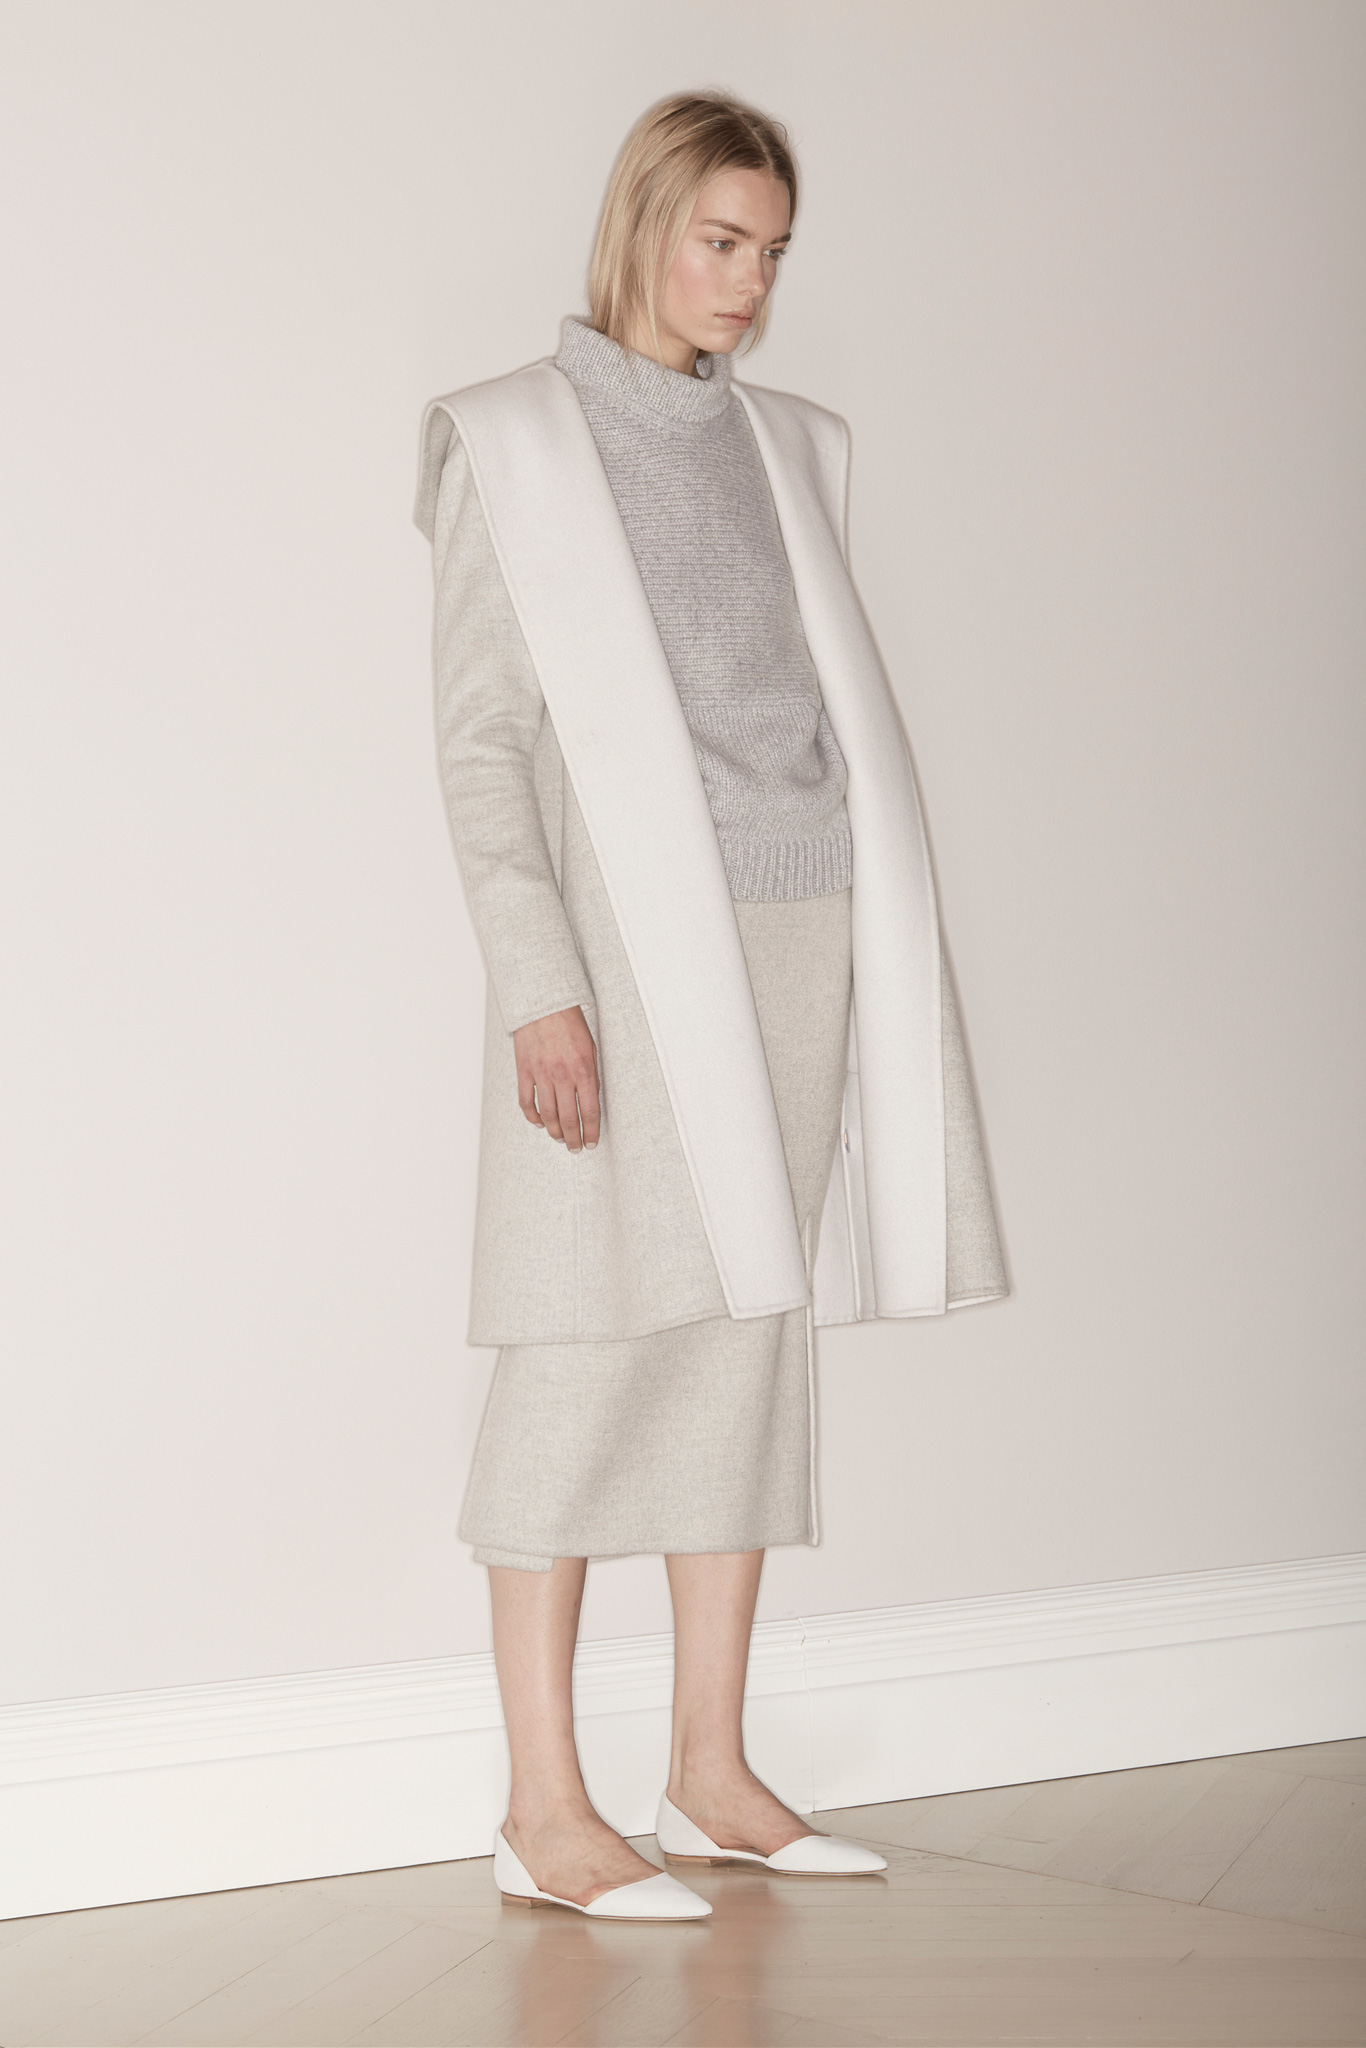 BROCK COLLECTION AW15'16 READY-TO-WEAR NEW YORK FASHION WEEK